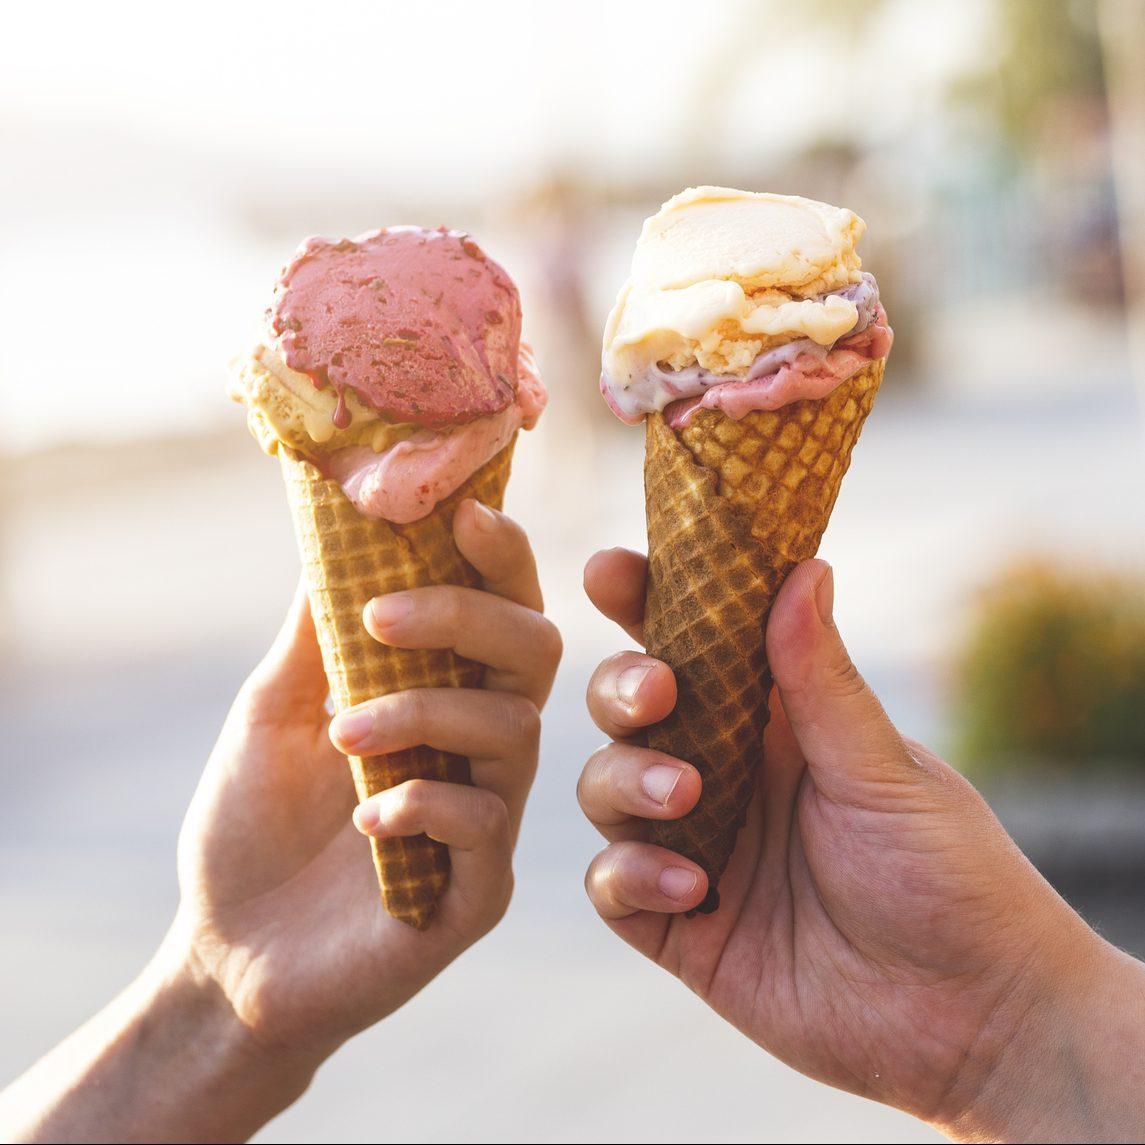 This is the most popular ice cream flavor among Americans